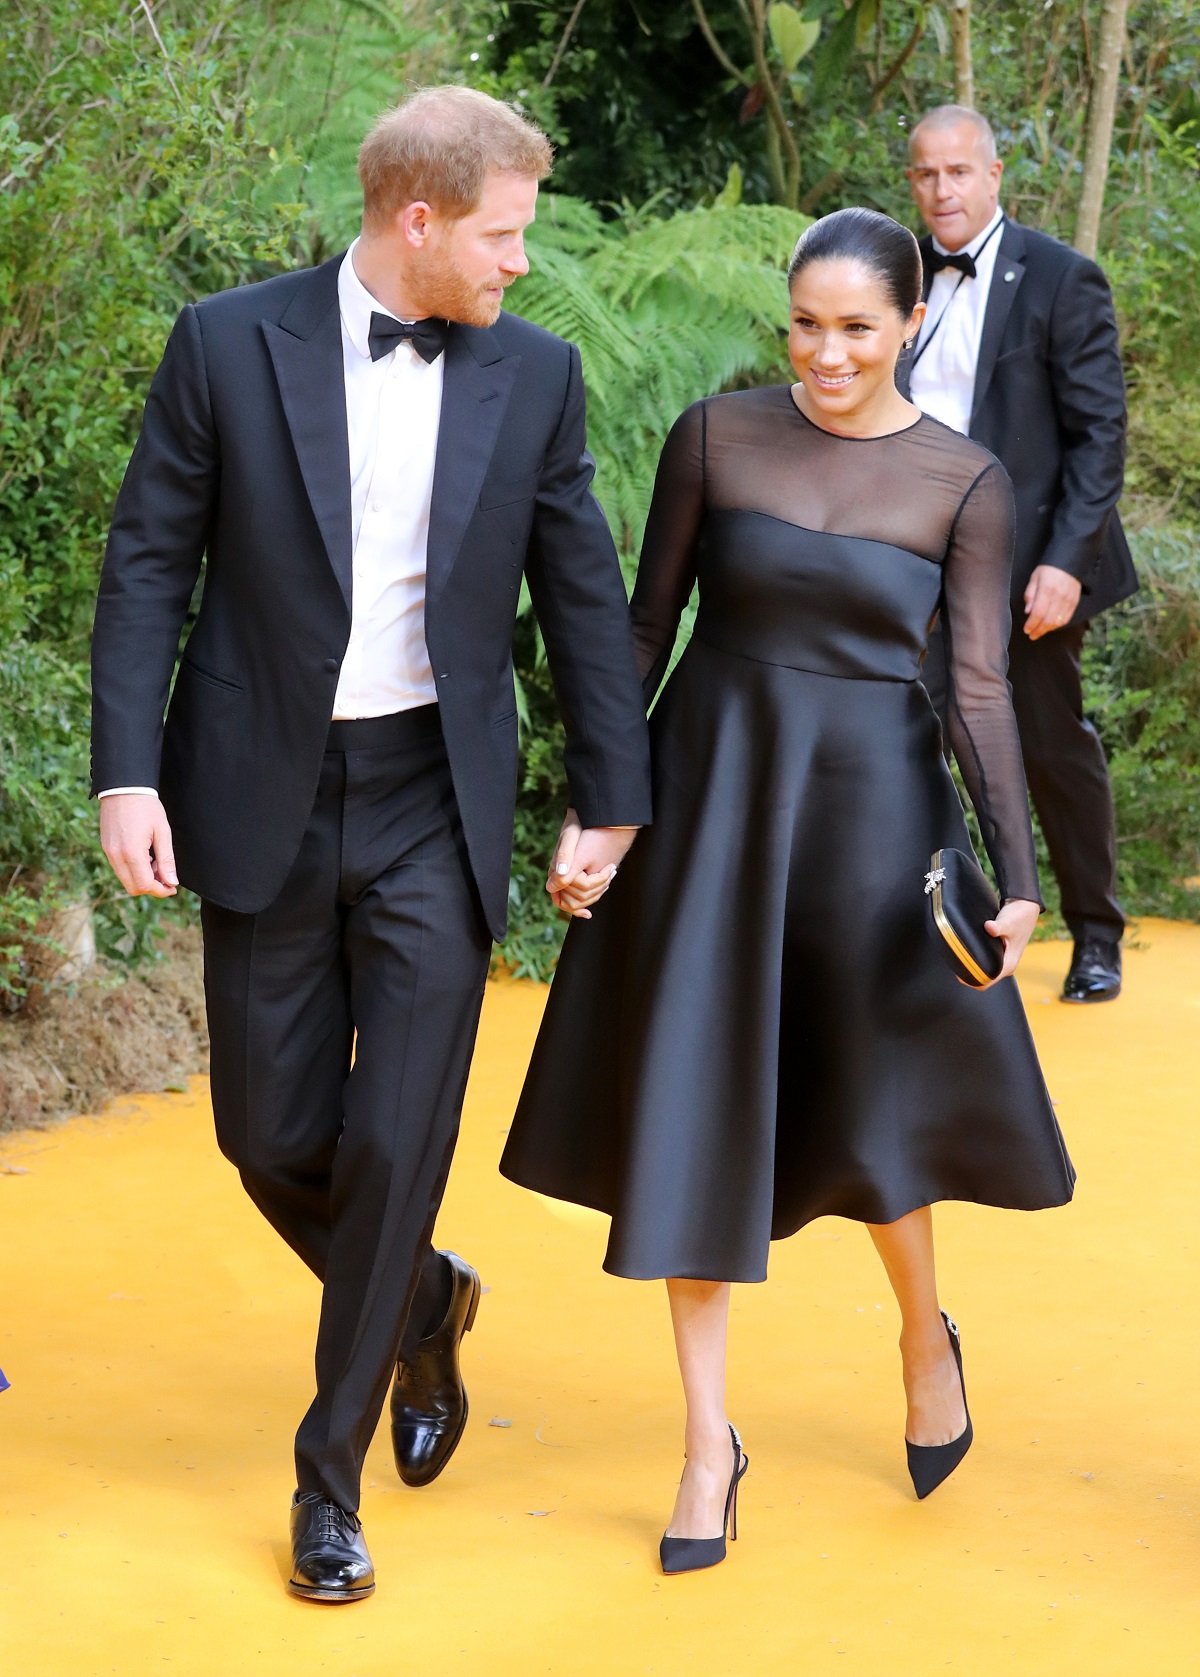 Prince Harry and Meghan Markle attend "The Lion King" European Premiere